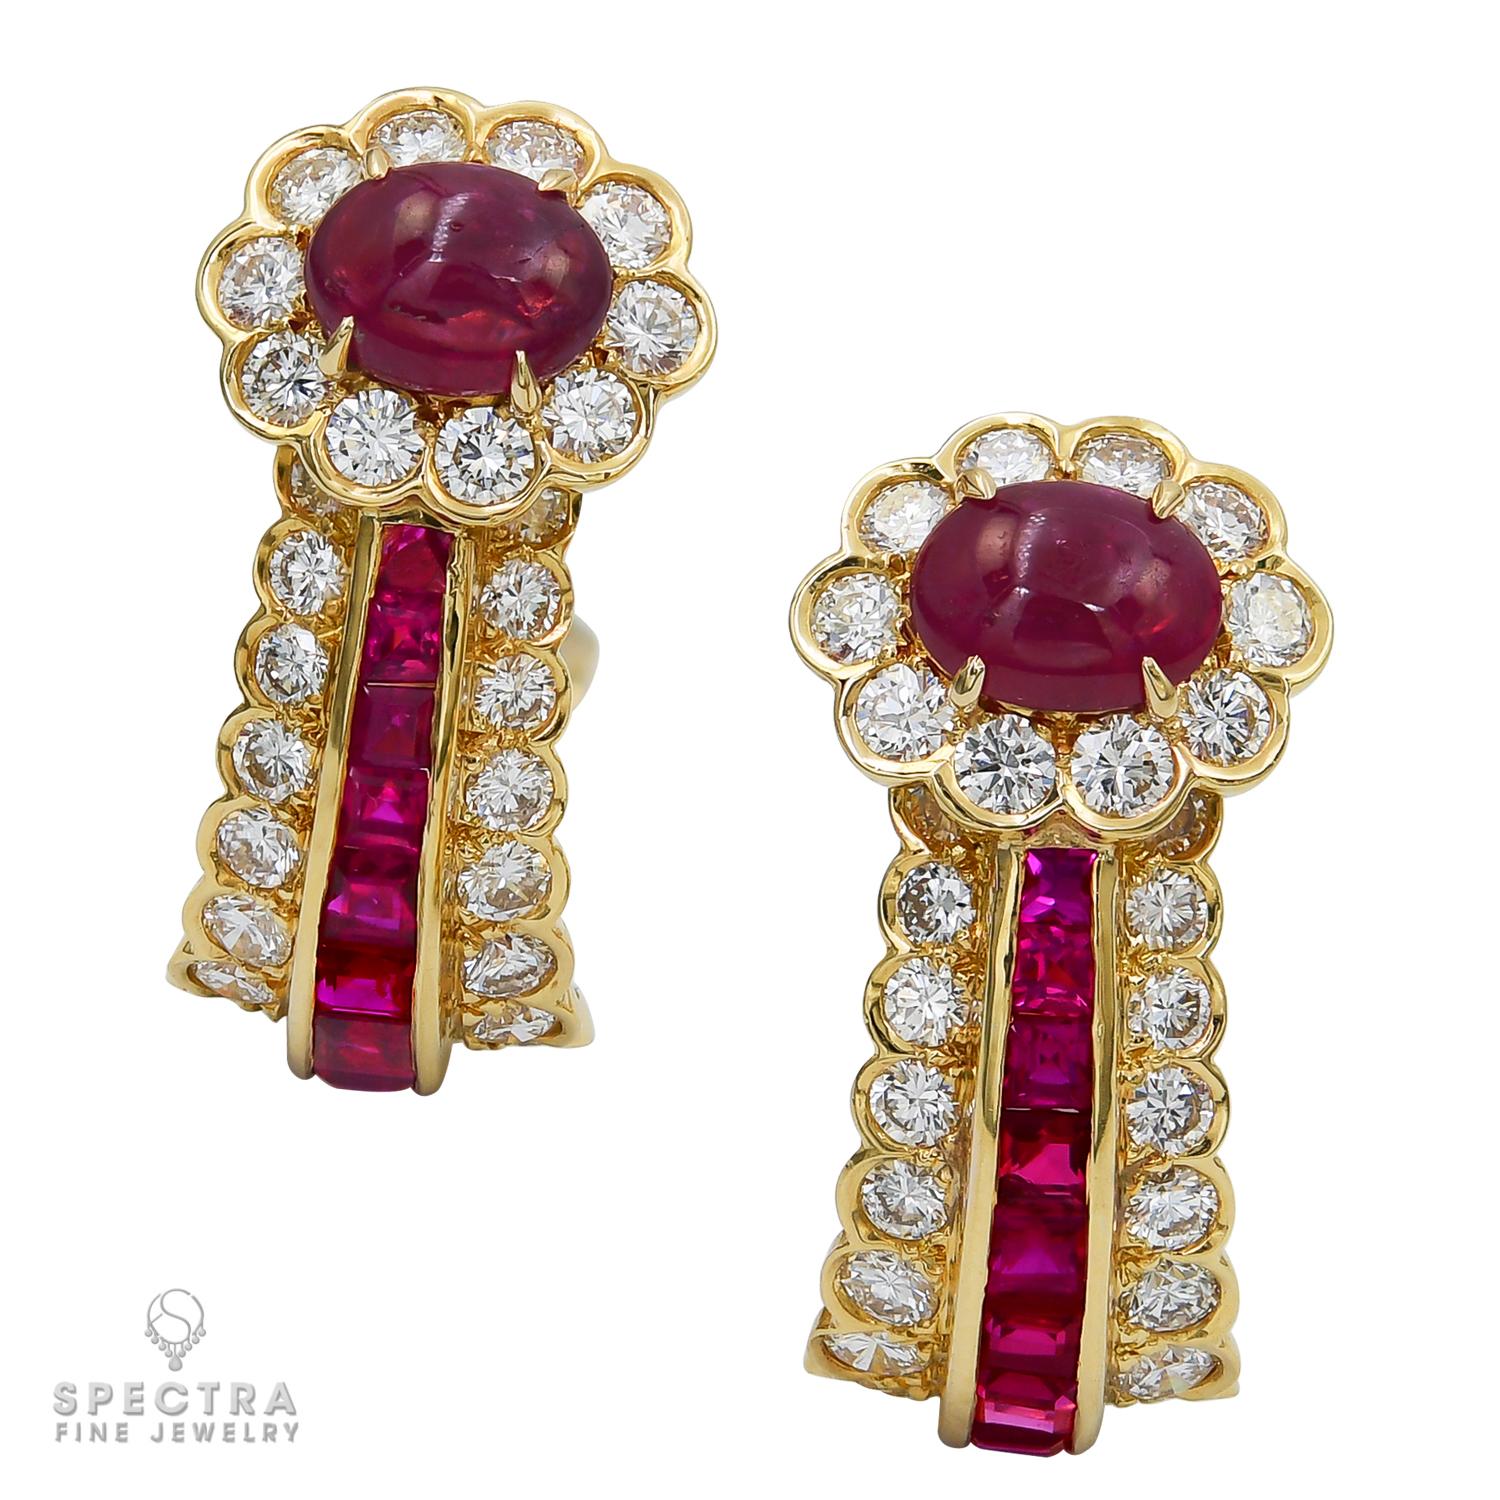 A pair of earrings made by Van Cleef & Arpels and comprising of rubies and diamonds.
Total weight of diamonds is 1.5 carat with E color, VVS clarity.
Rubies are weighing a total of 3.5 carats.
Metal is 18k yellow gold; gross weight 11.8